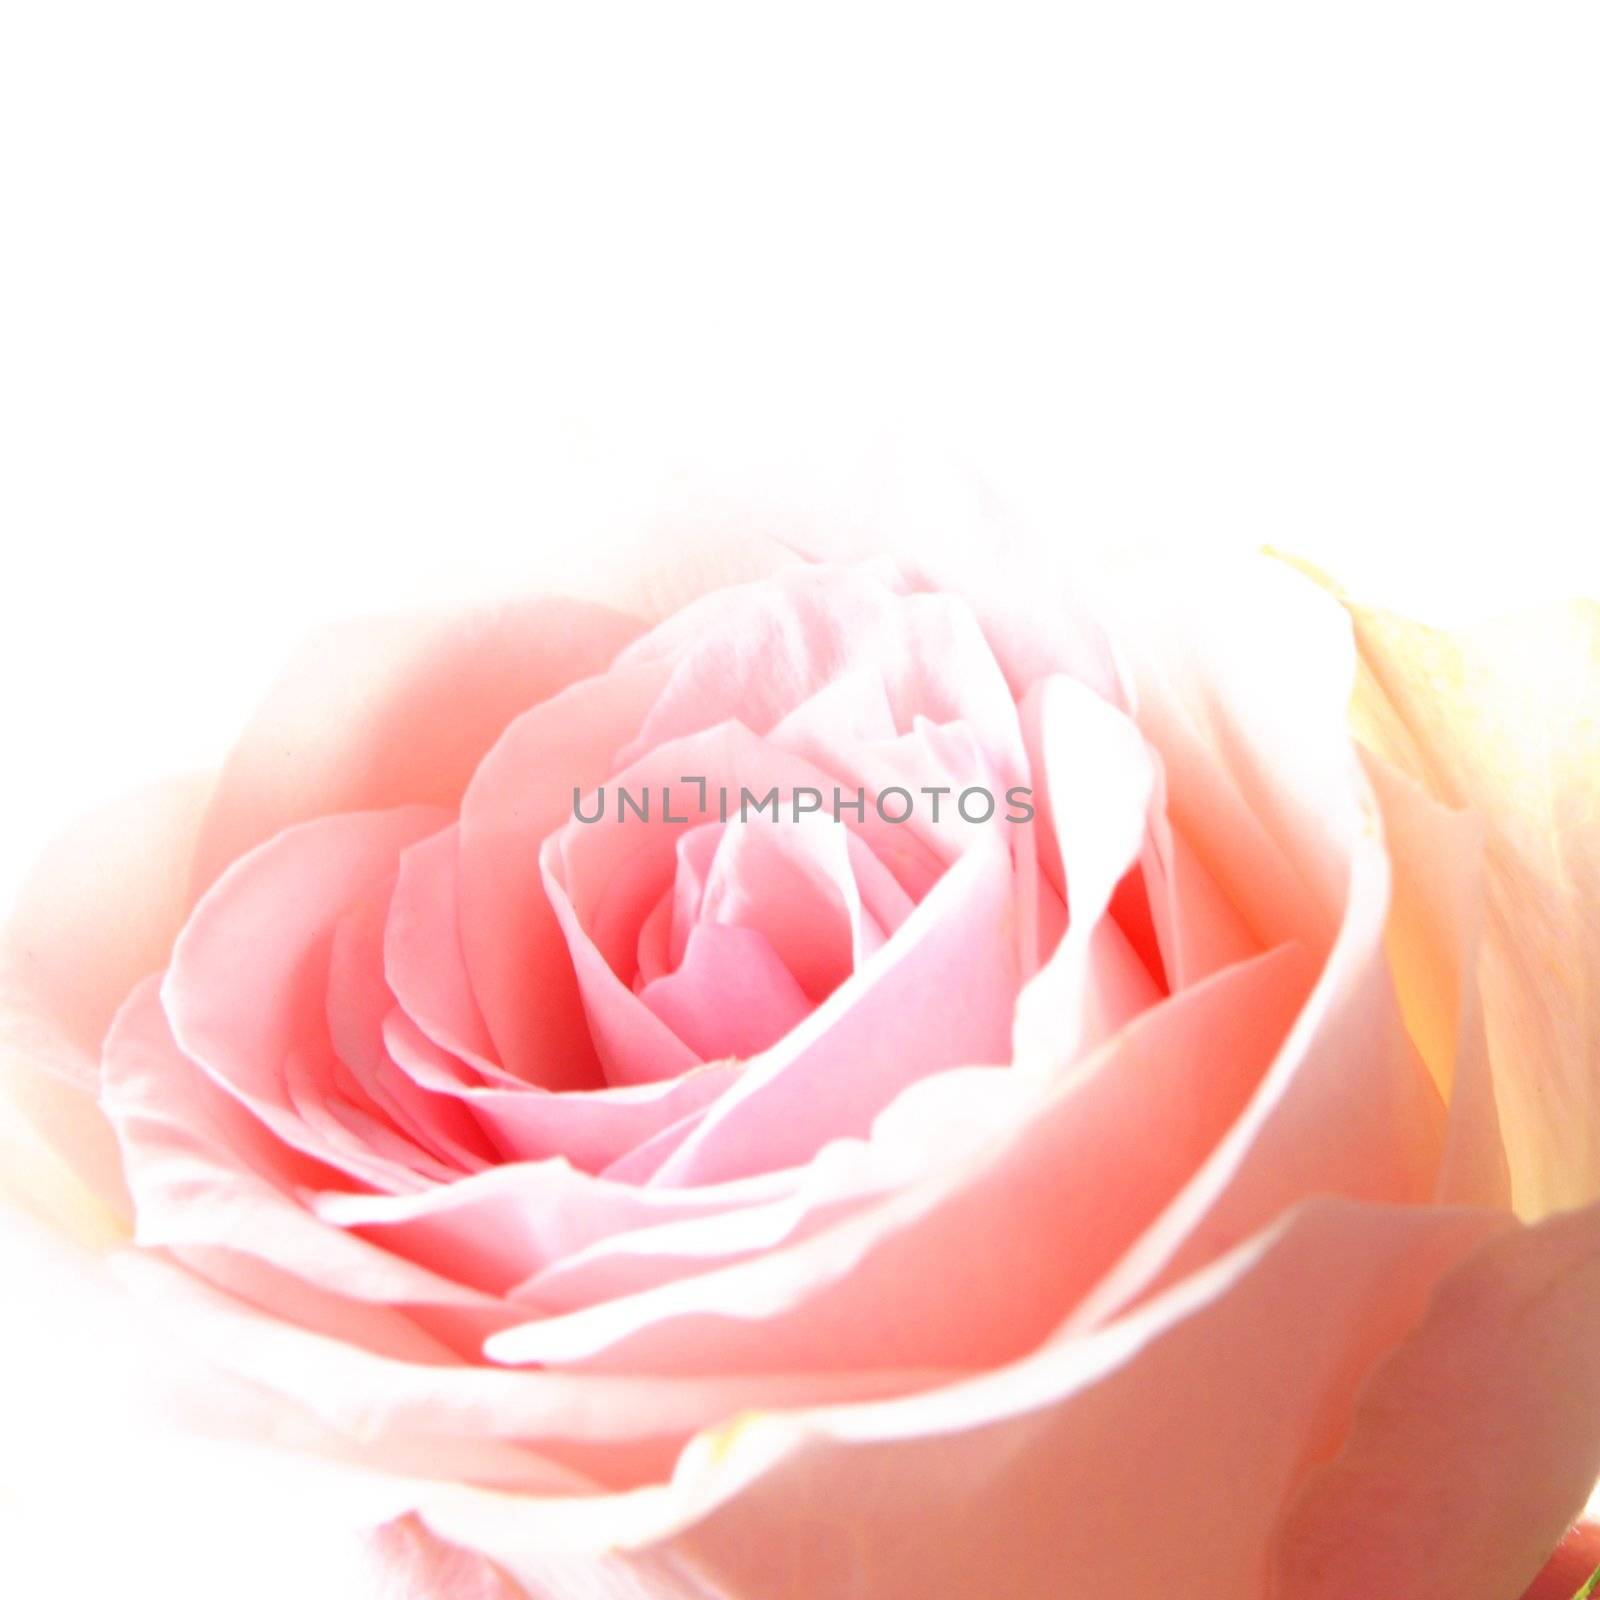 flowers of pink roses on white background